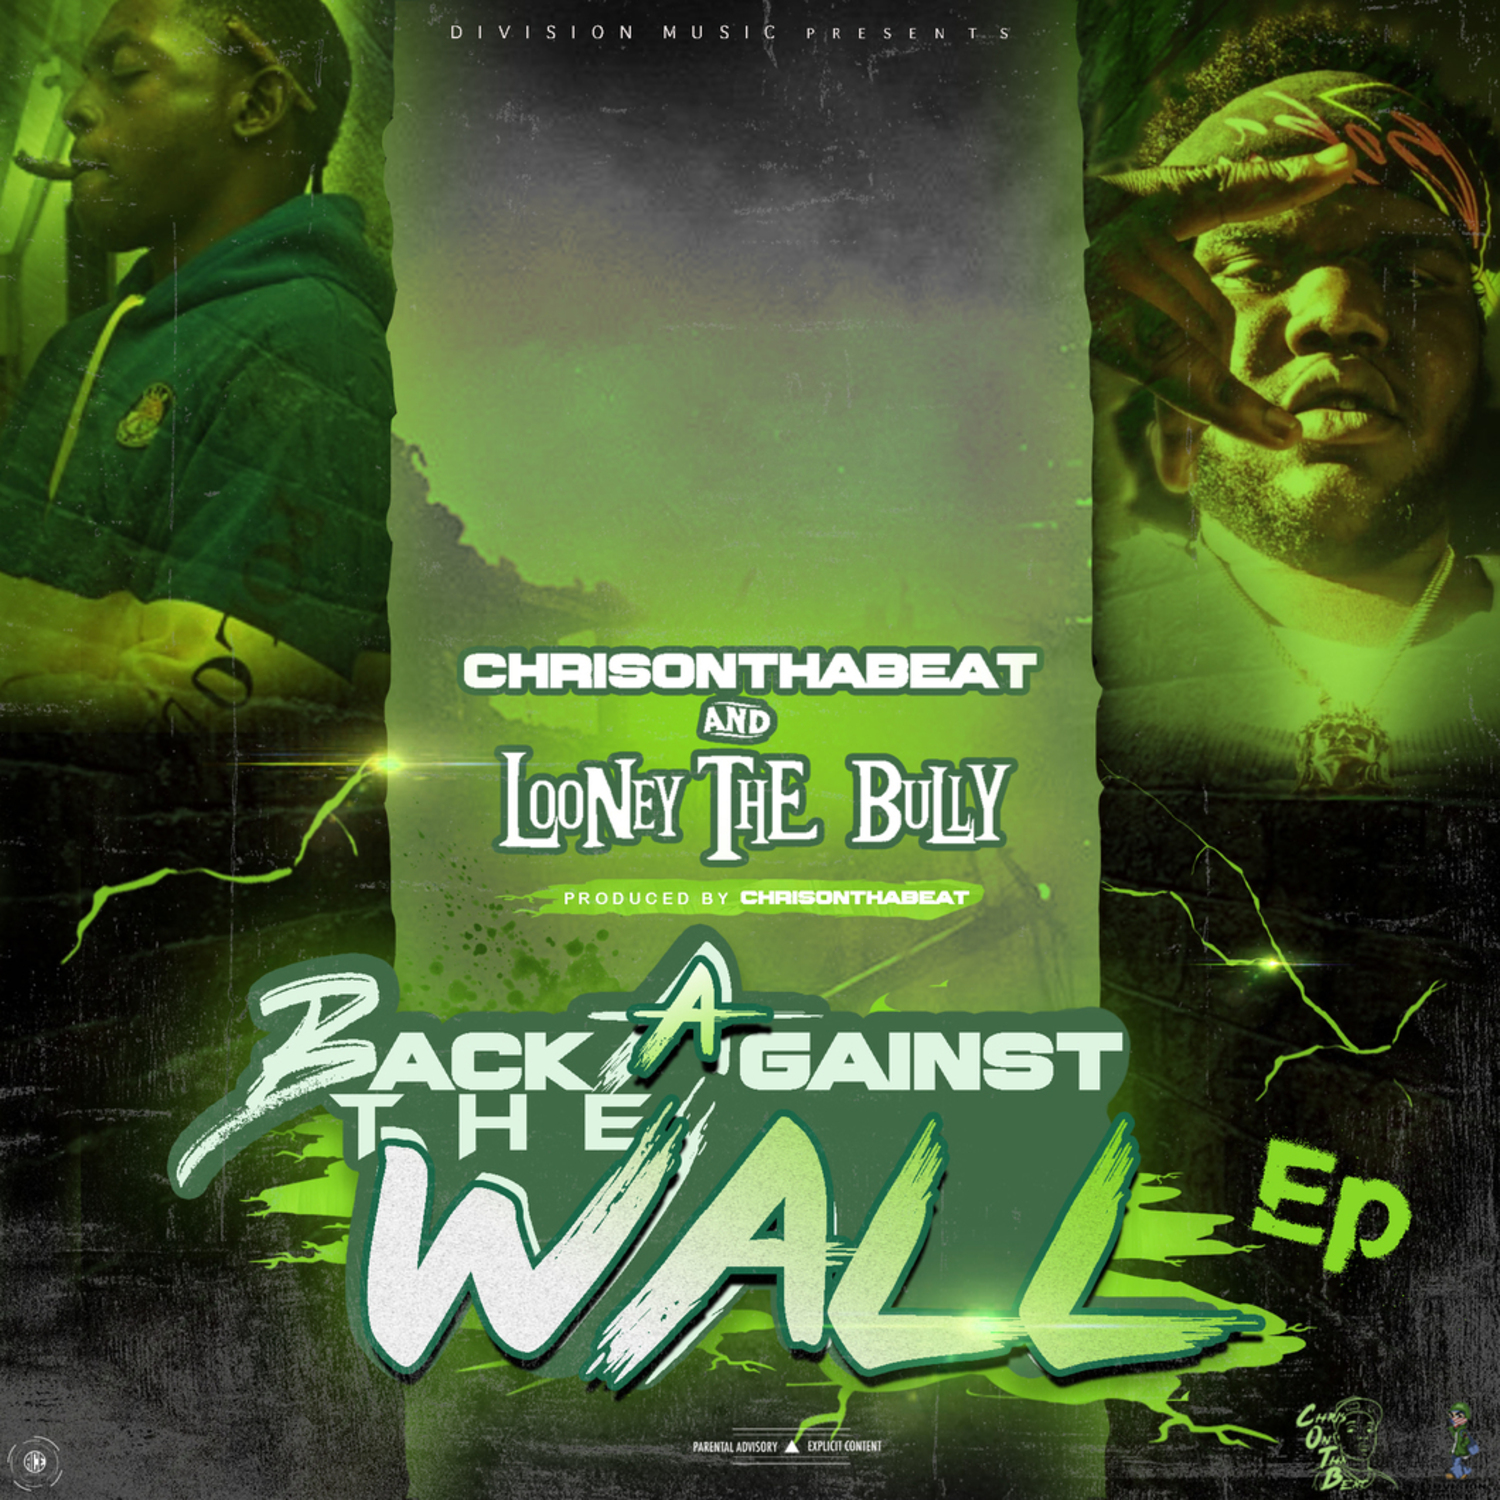 Back Against The Wall - EP